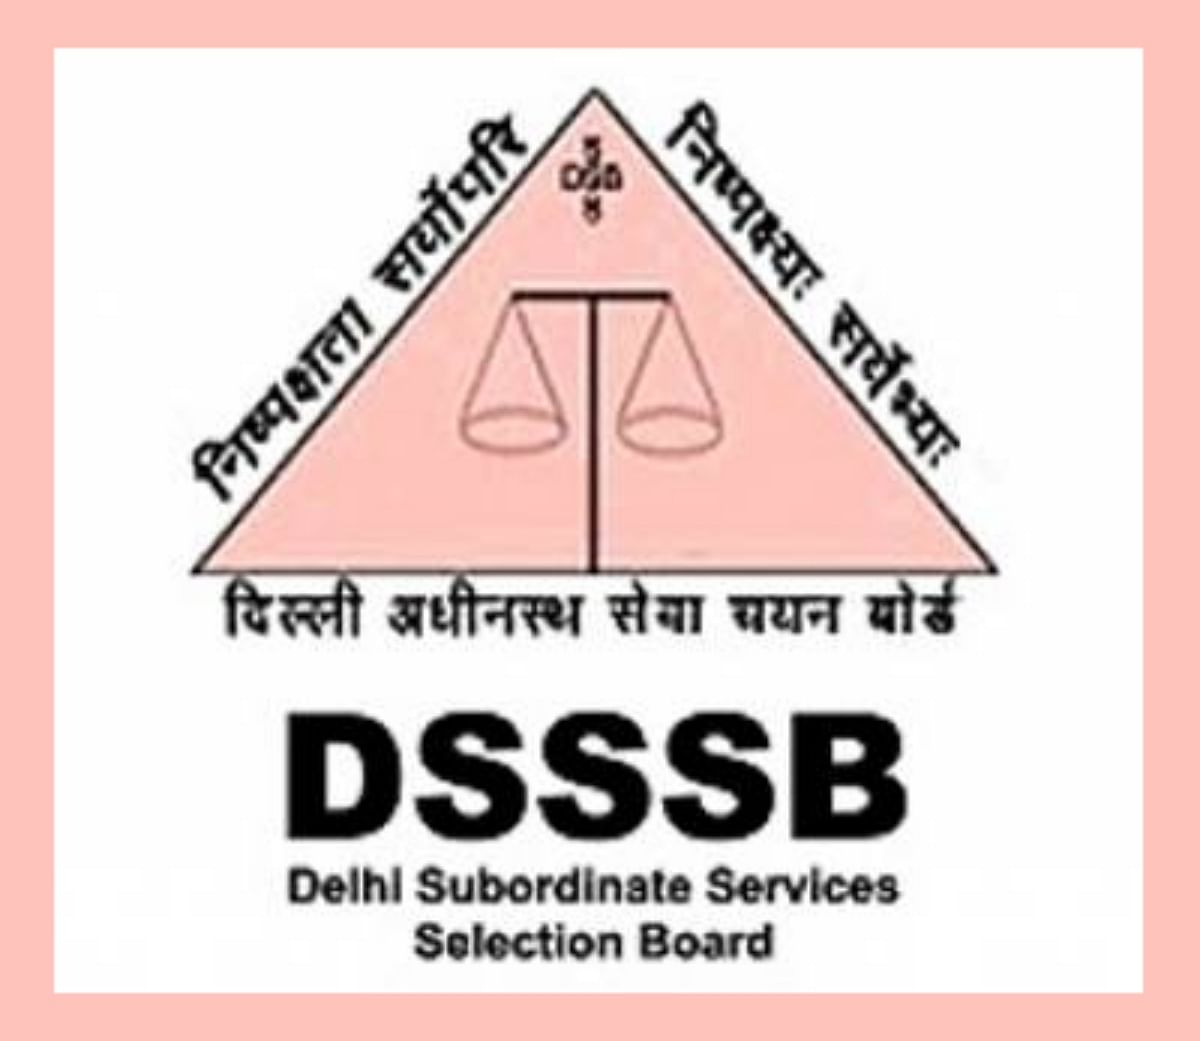 DSSSB Recruitment 2021: Last Date to Apply for 5807 TGT Teacher Posts Today, Apply Here